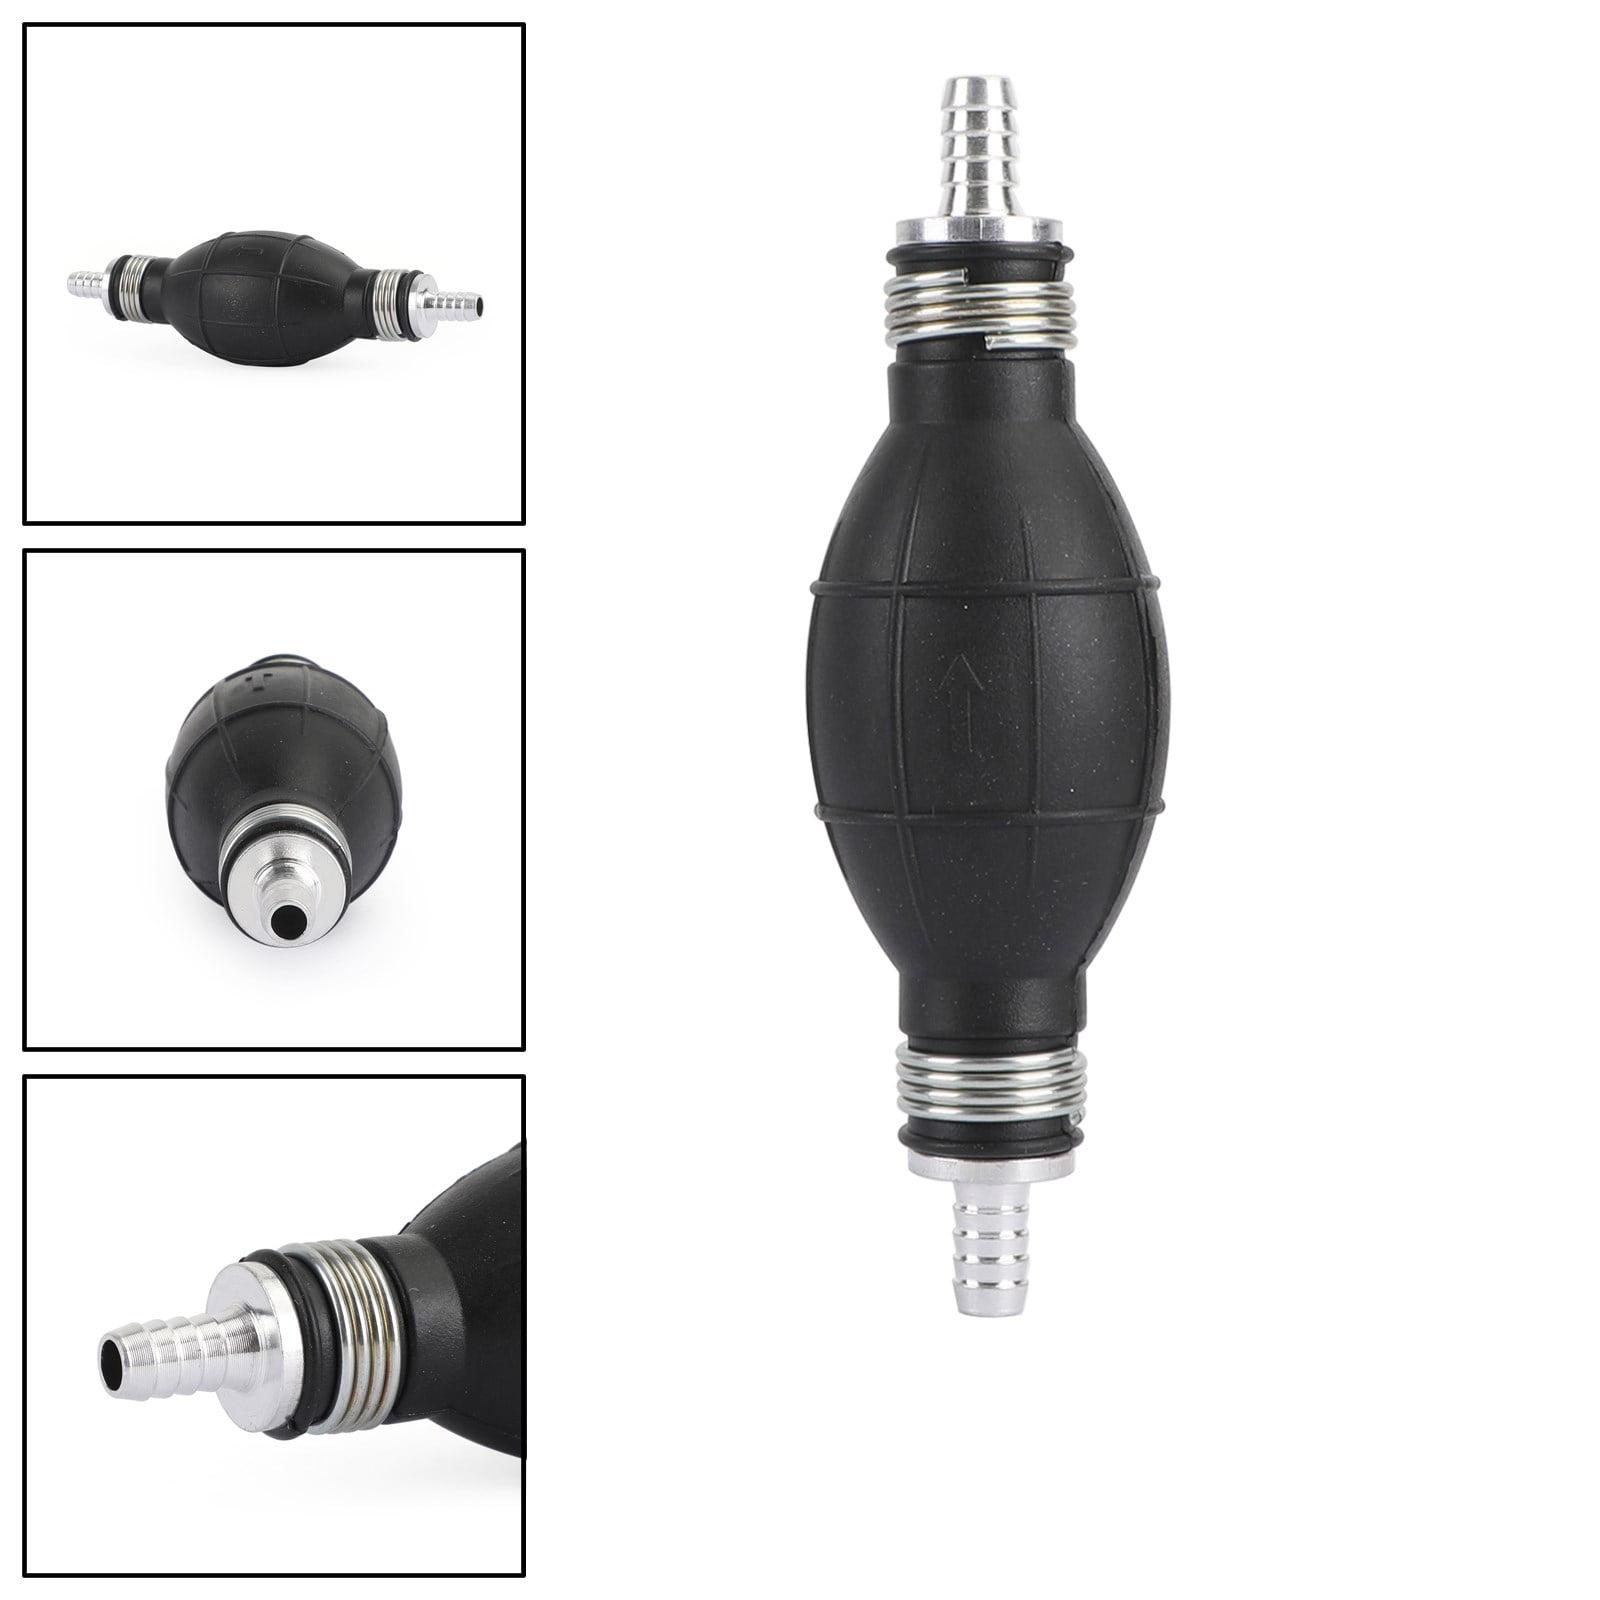 5/16" Primer Bulb with One Way Non-Return Valve & 1 Metre Fuel Hose and 4 clips 